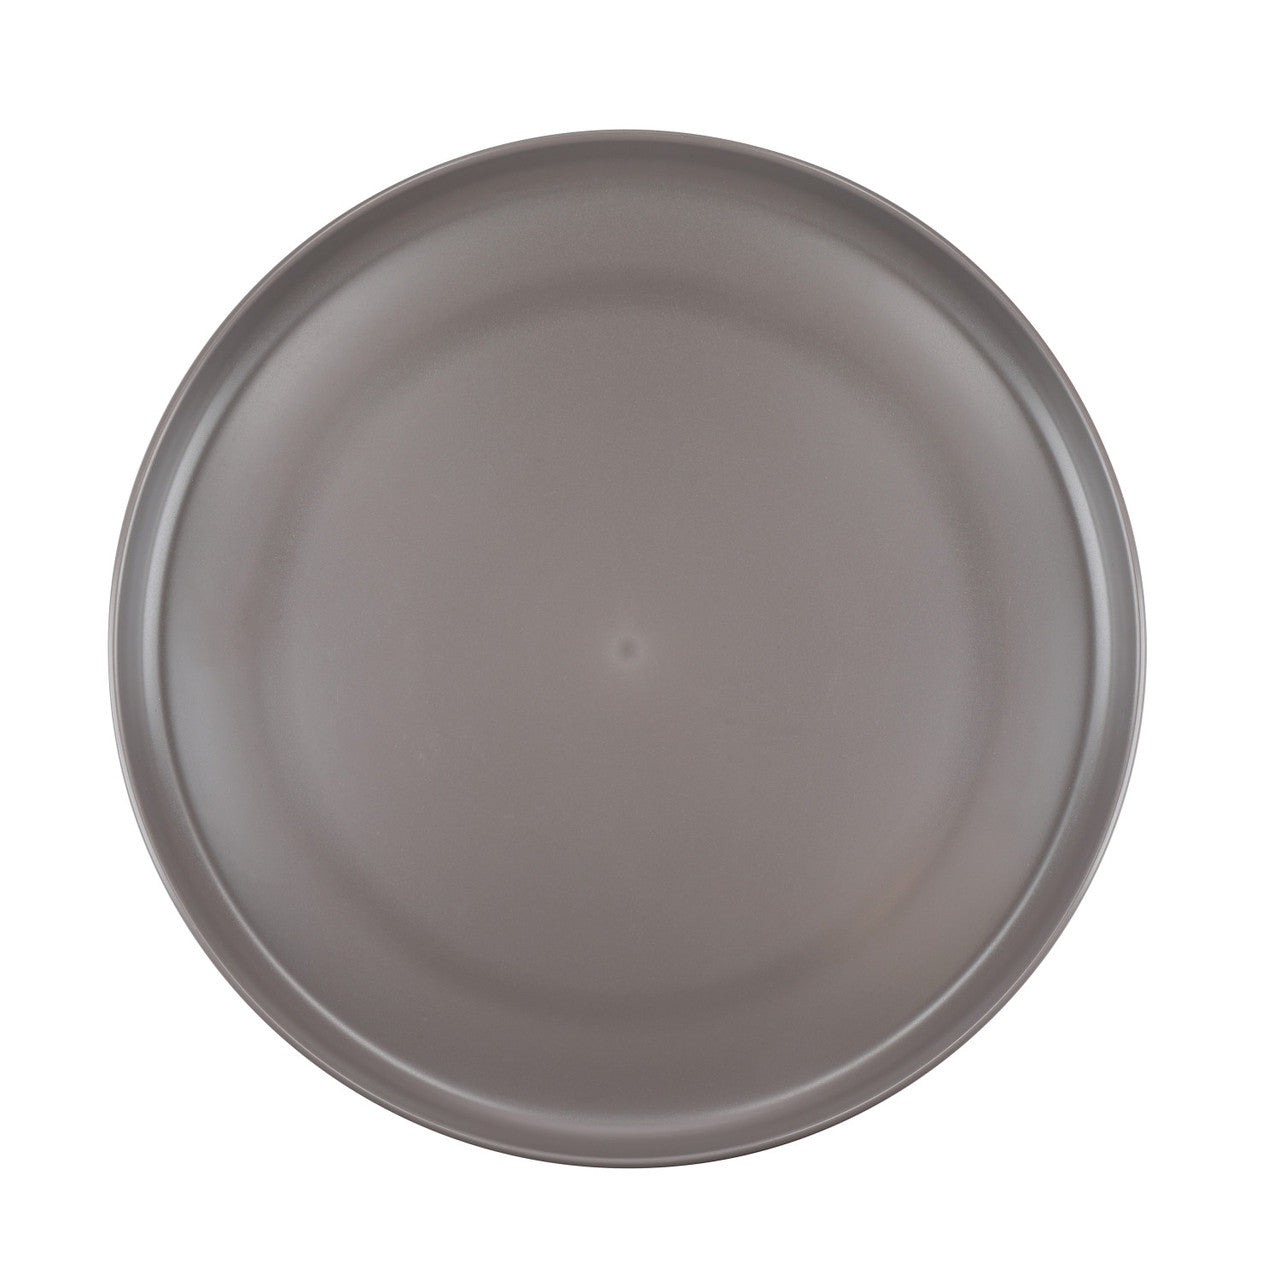 Mikasa Summer Set of 4 Recycled Plastic 25cm Lipped Dinner Plates